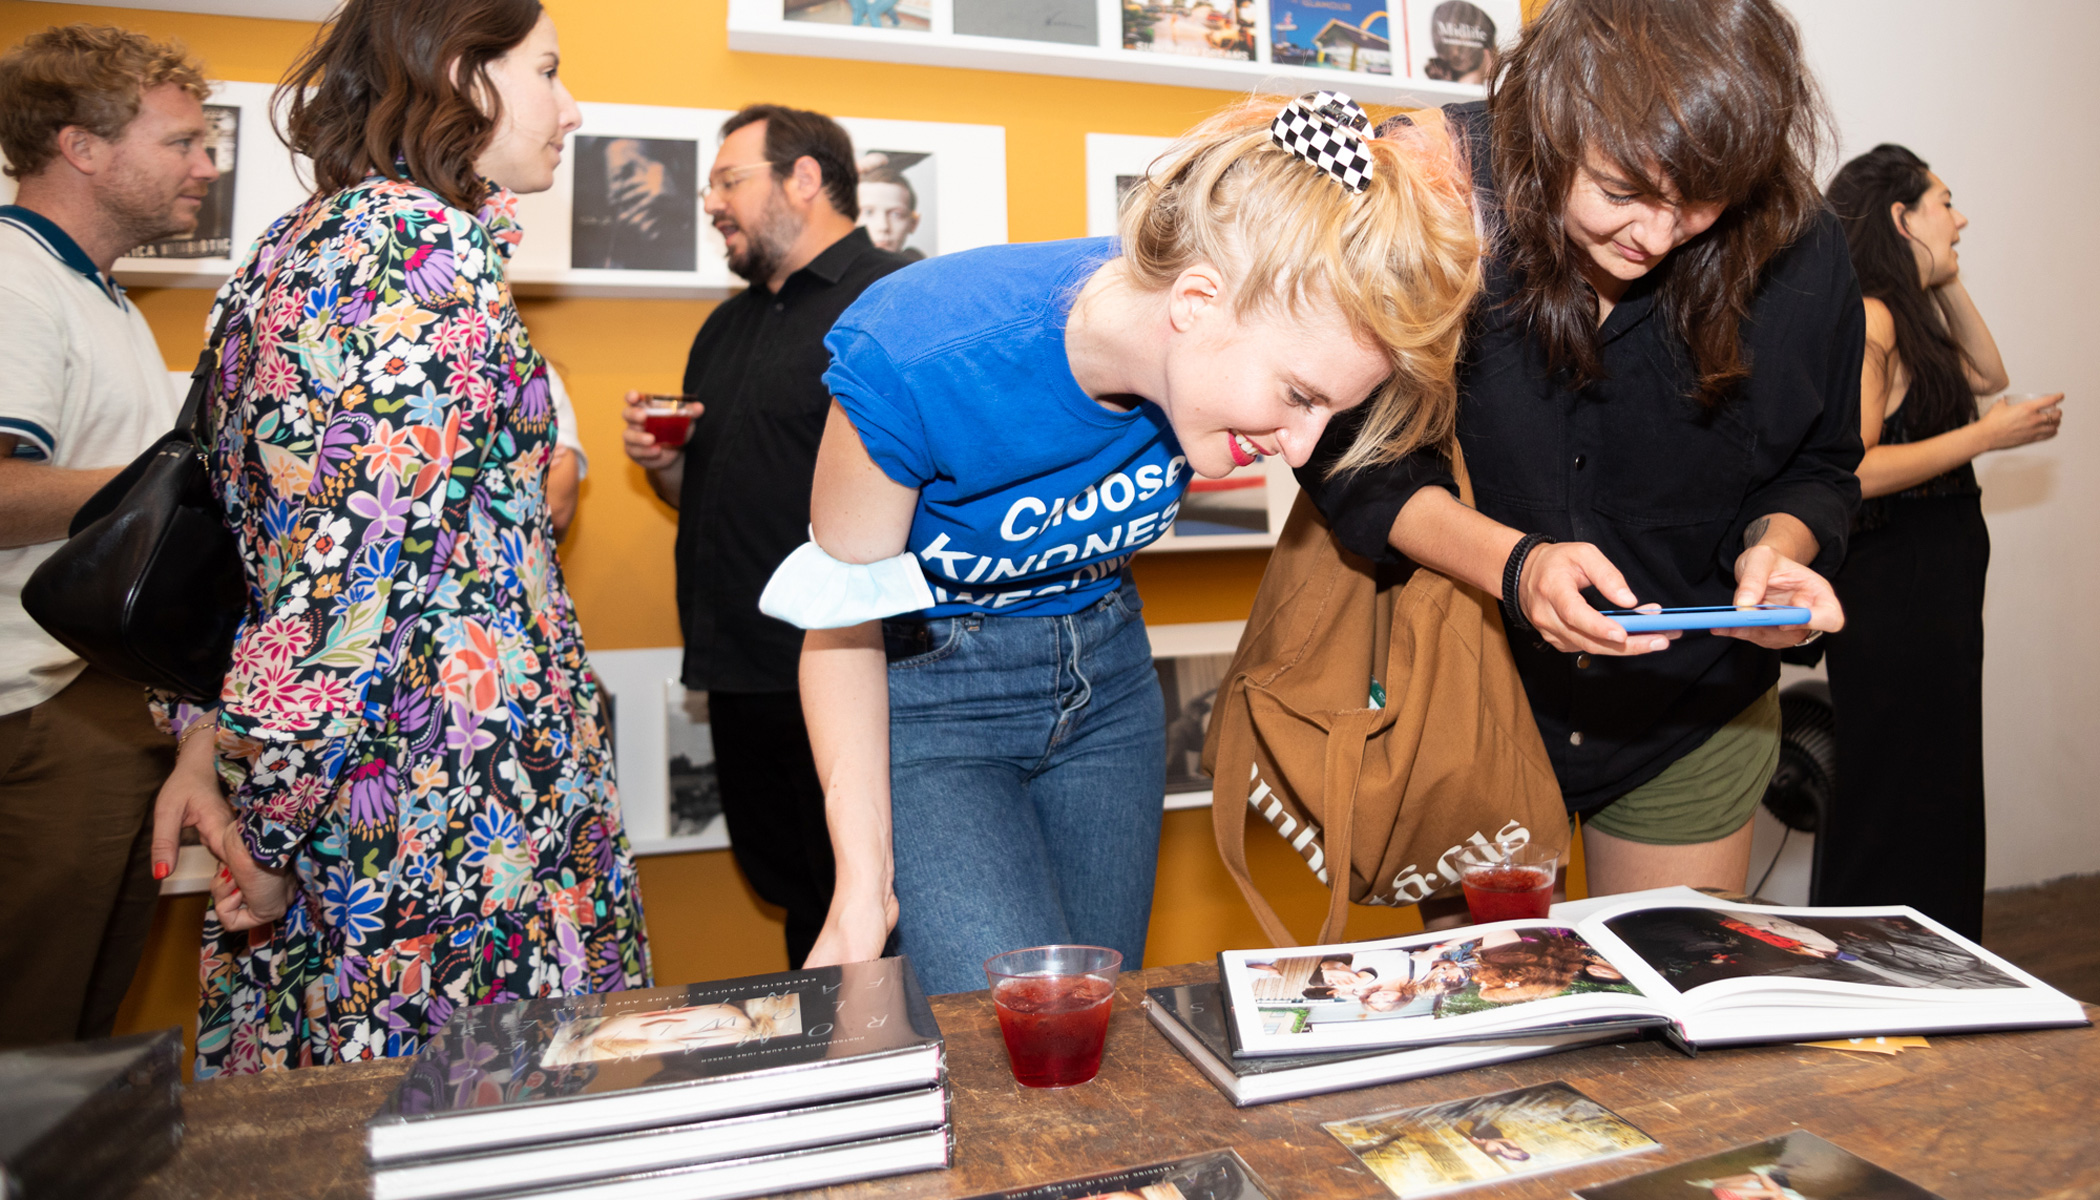 Woman in a blue shirt bent over a table looking at pictures in a book that's on display. Another woman next to her takes a picture of the book on her phone. People in the background walk past and look at the other books on display.